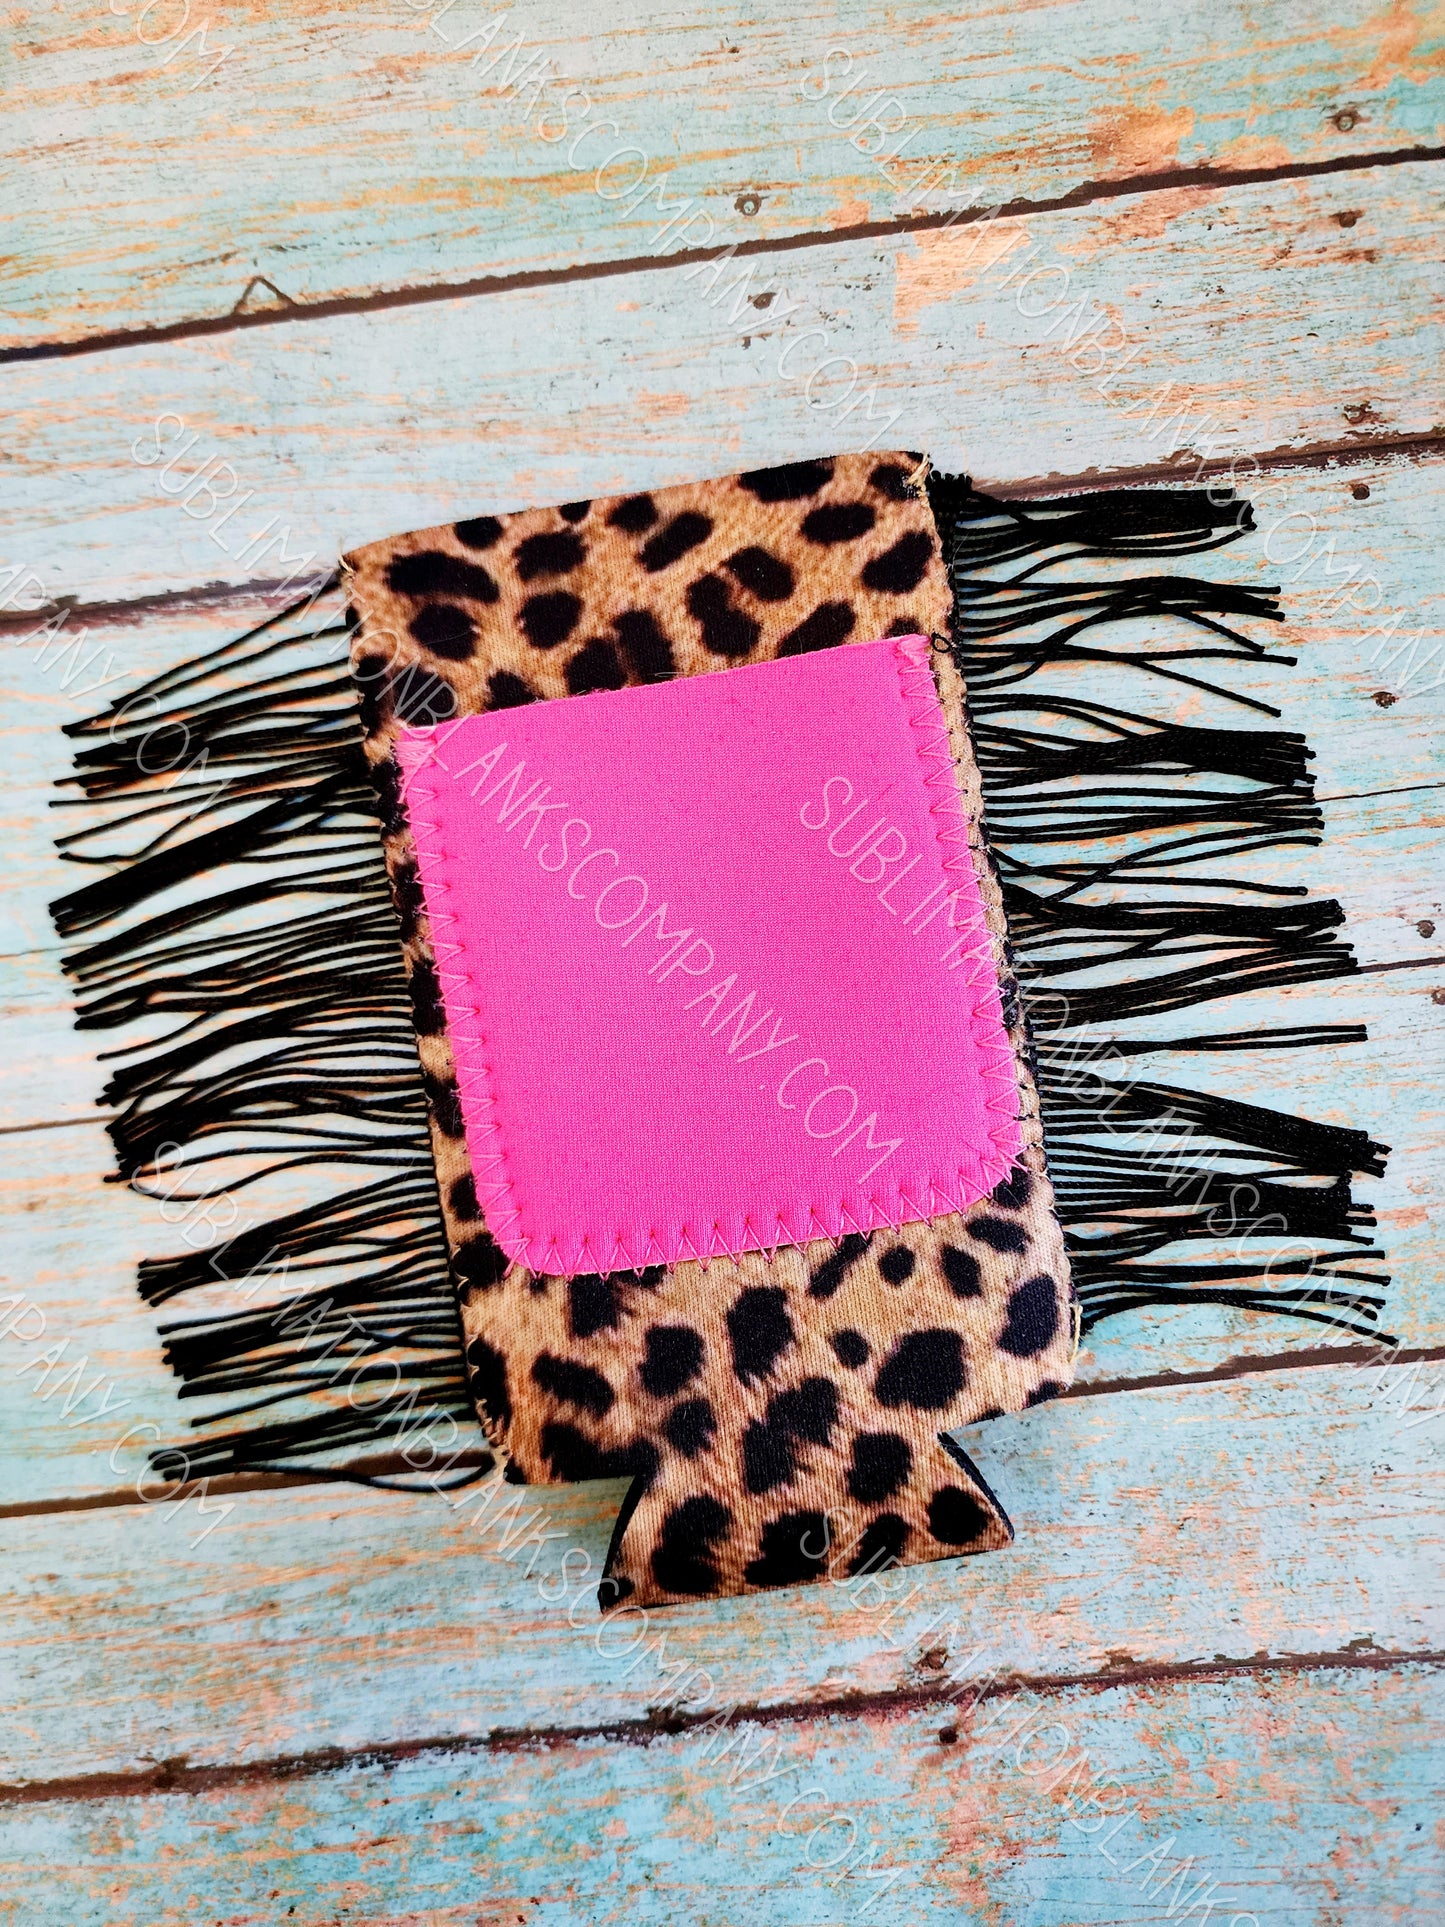 Blank Fringe Tassel Leopard Cheetah Neoprene Slim Can Coozie with Pink Pocket Sublimation Blank! Can Cooler